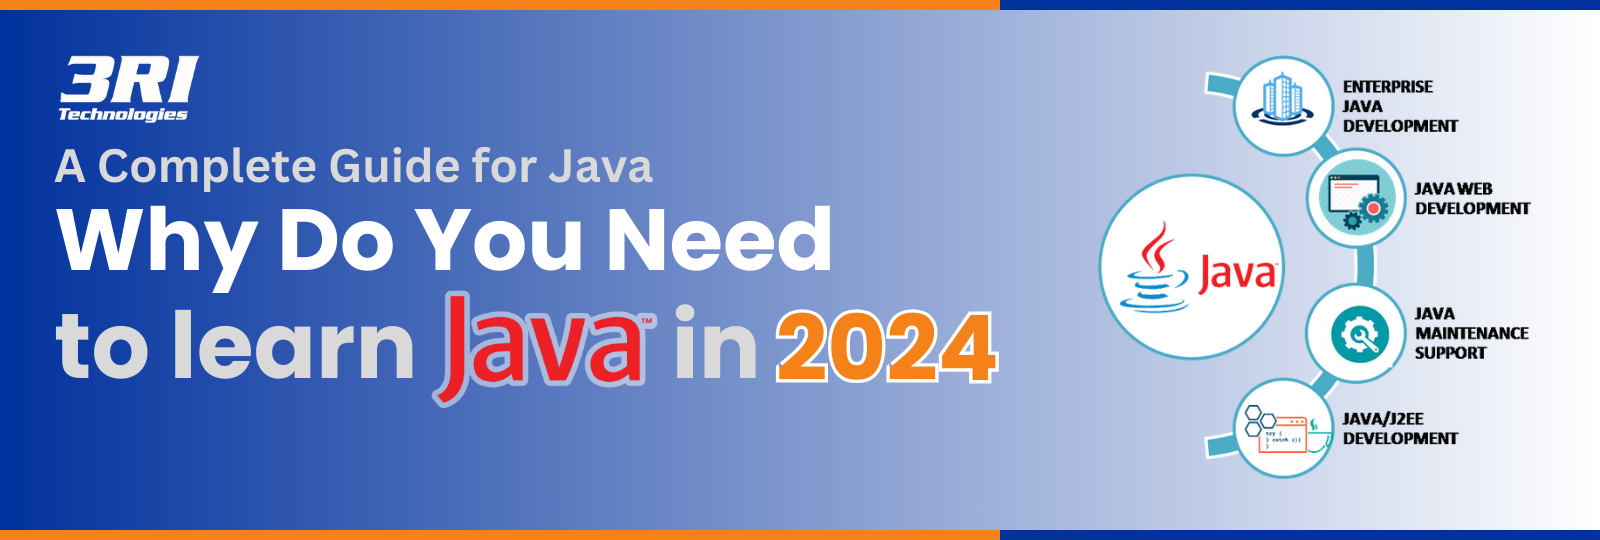 Should I learn Java in 2024?